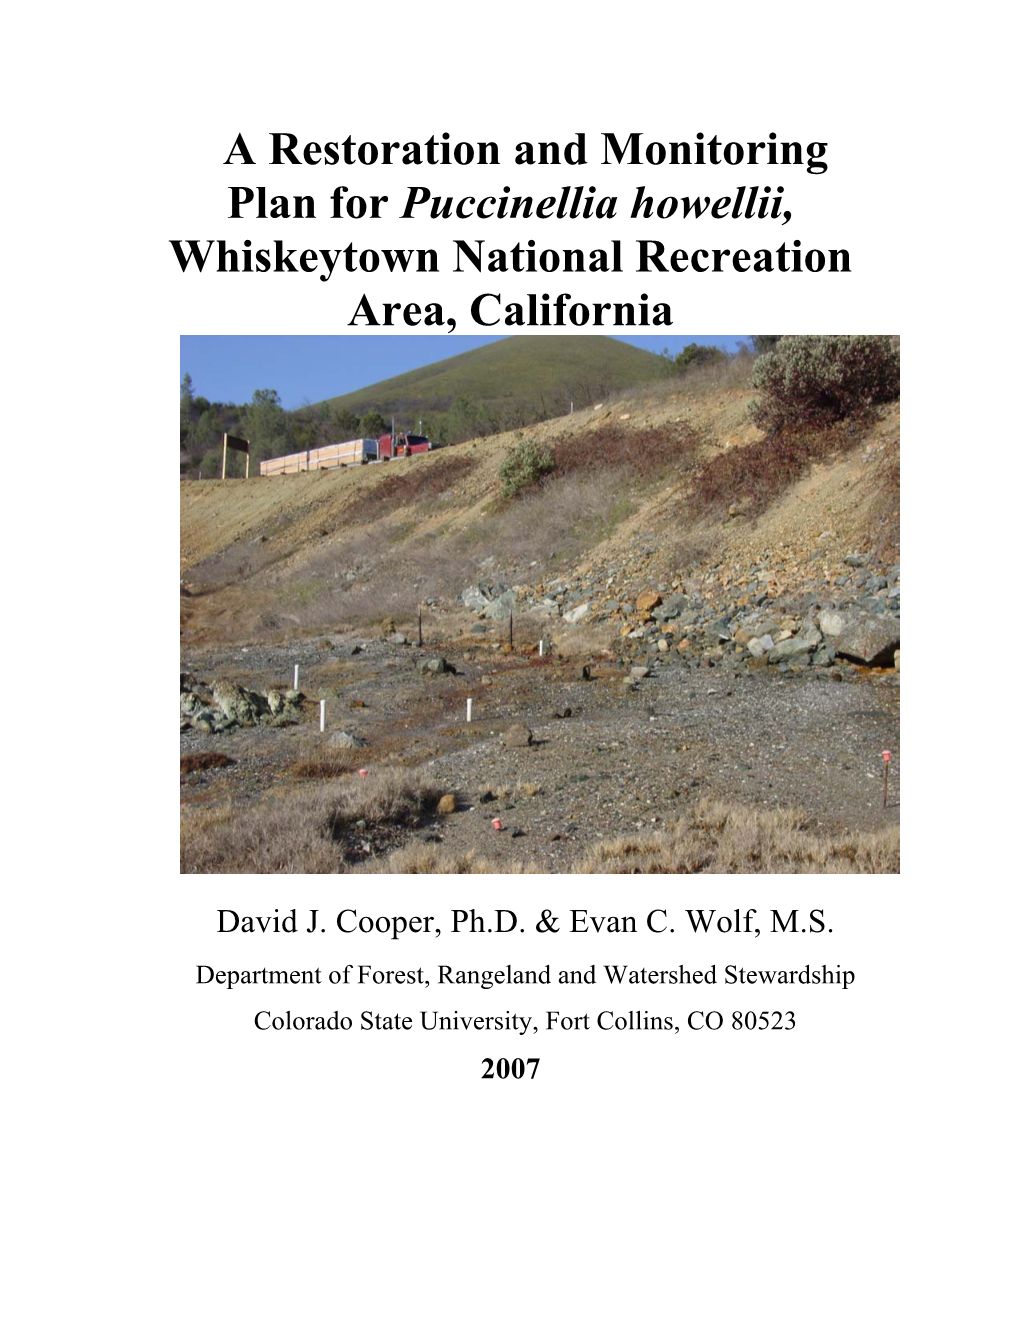 A Restoration and Monitoring Plan for Puccinellia Howellii, Whiskeytown National Recreation Area, California